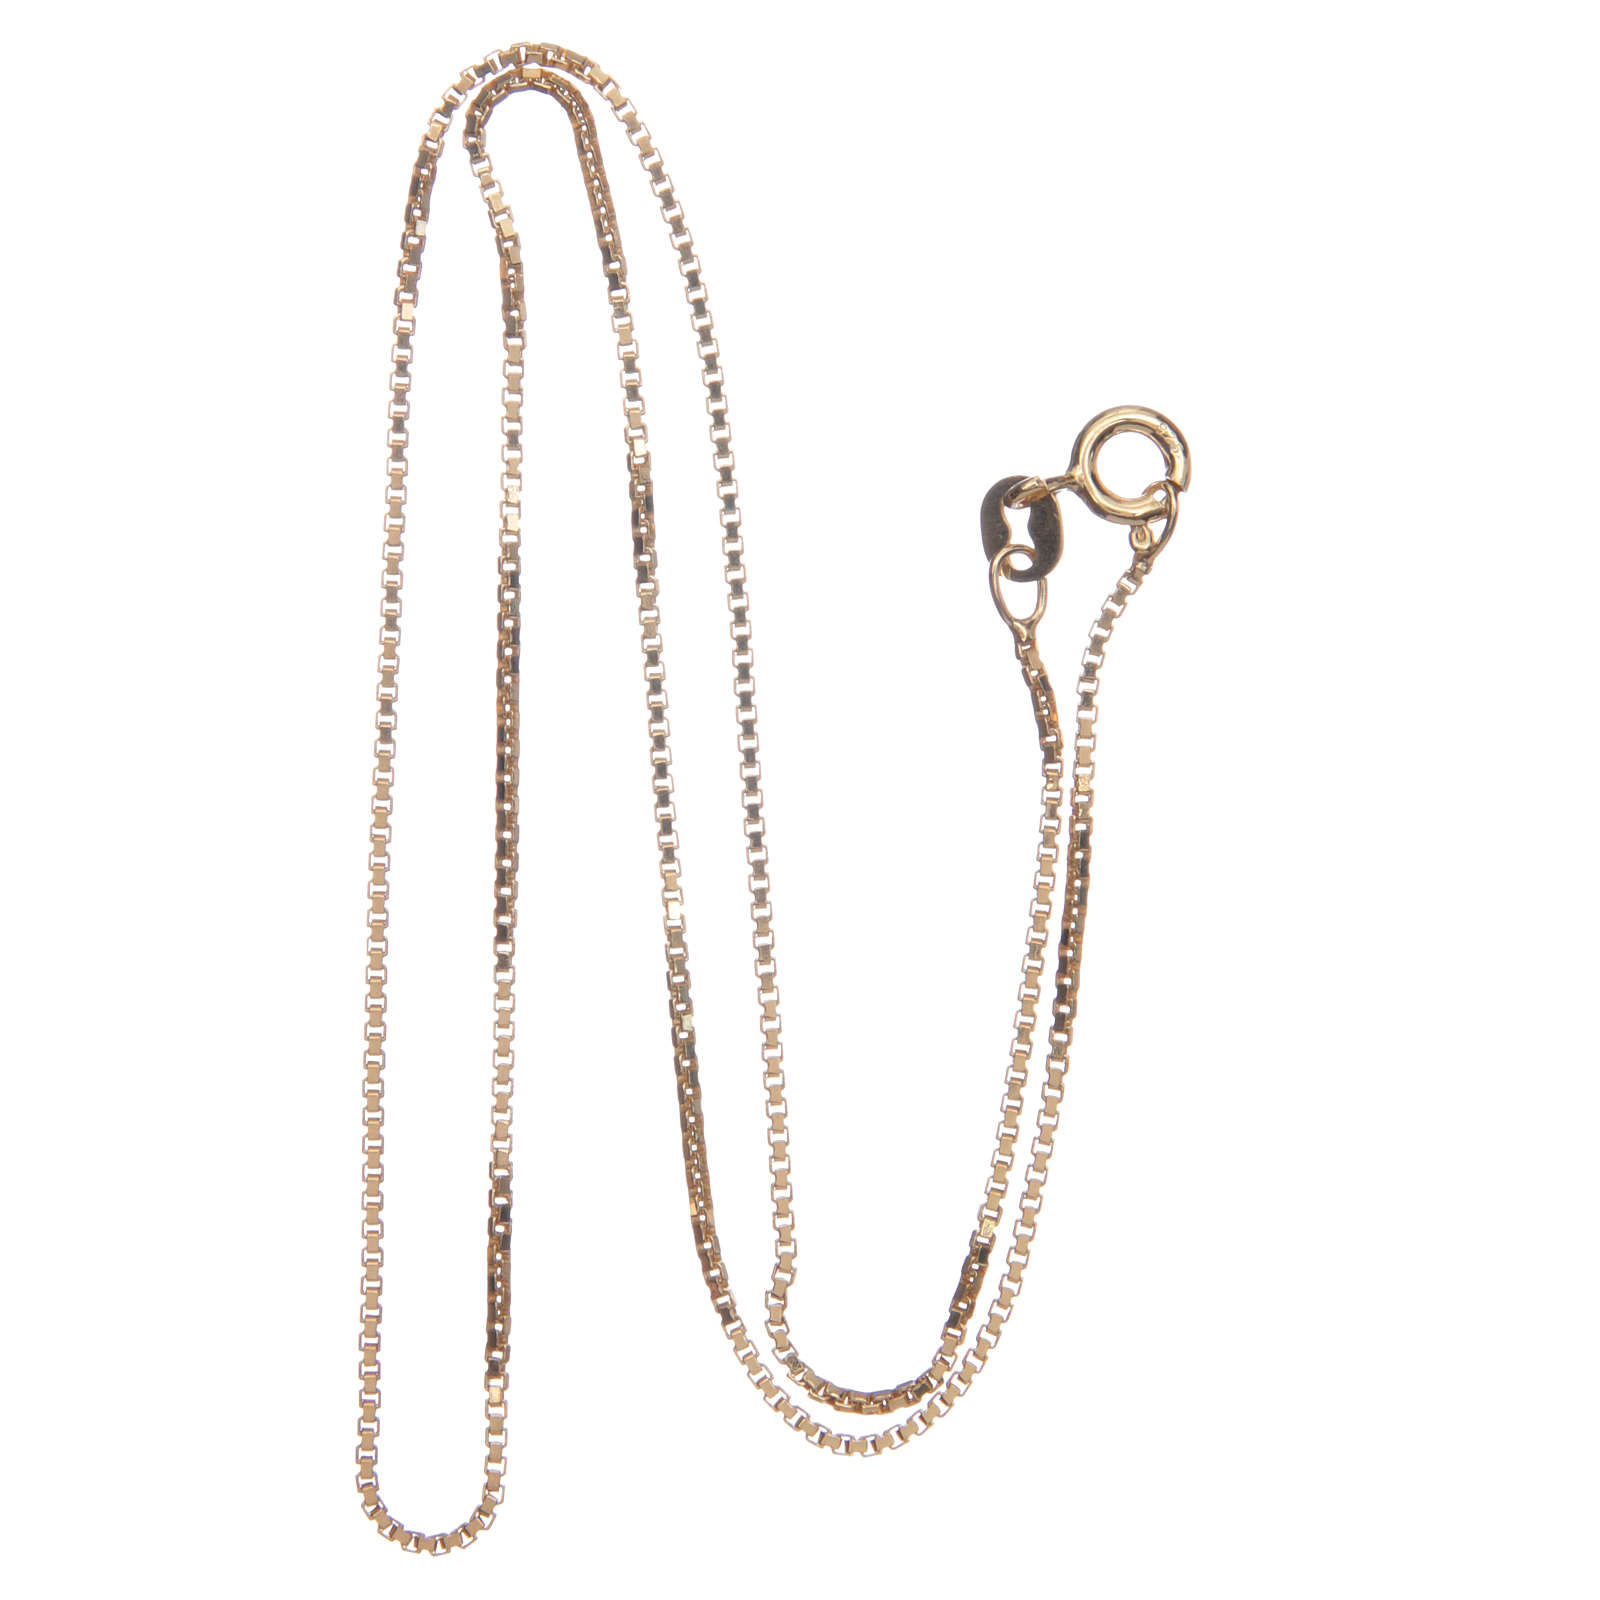 Venetian Chain In 925 Sterling Silver Finished In Gold 40 Cm Length 